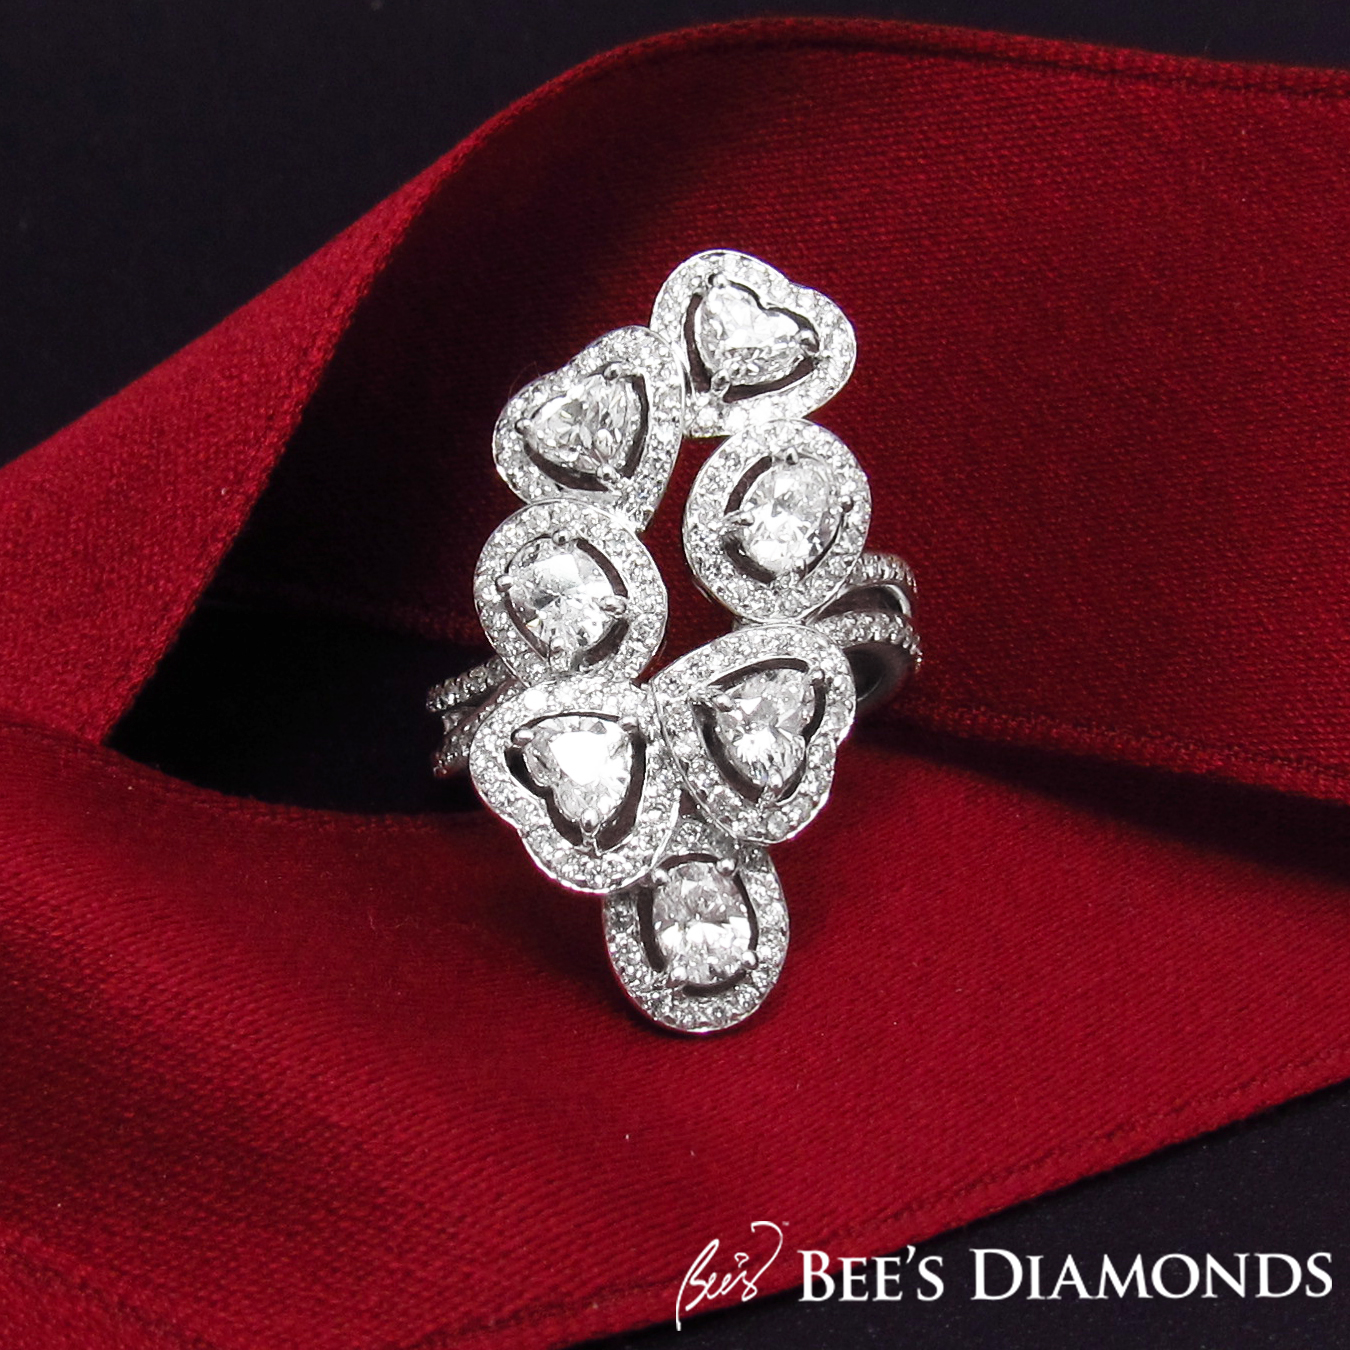 Large and appealing diamond cocktail ring | Bee's Diamonds